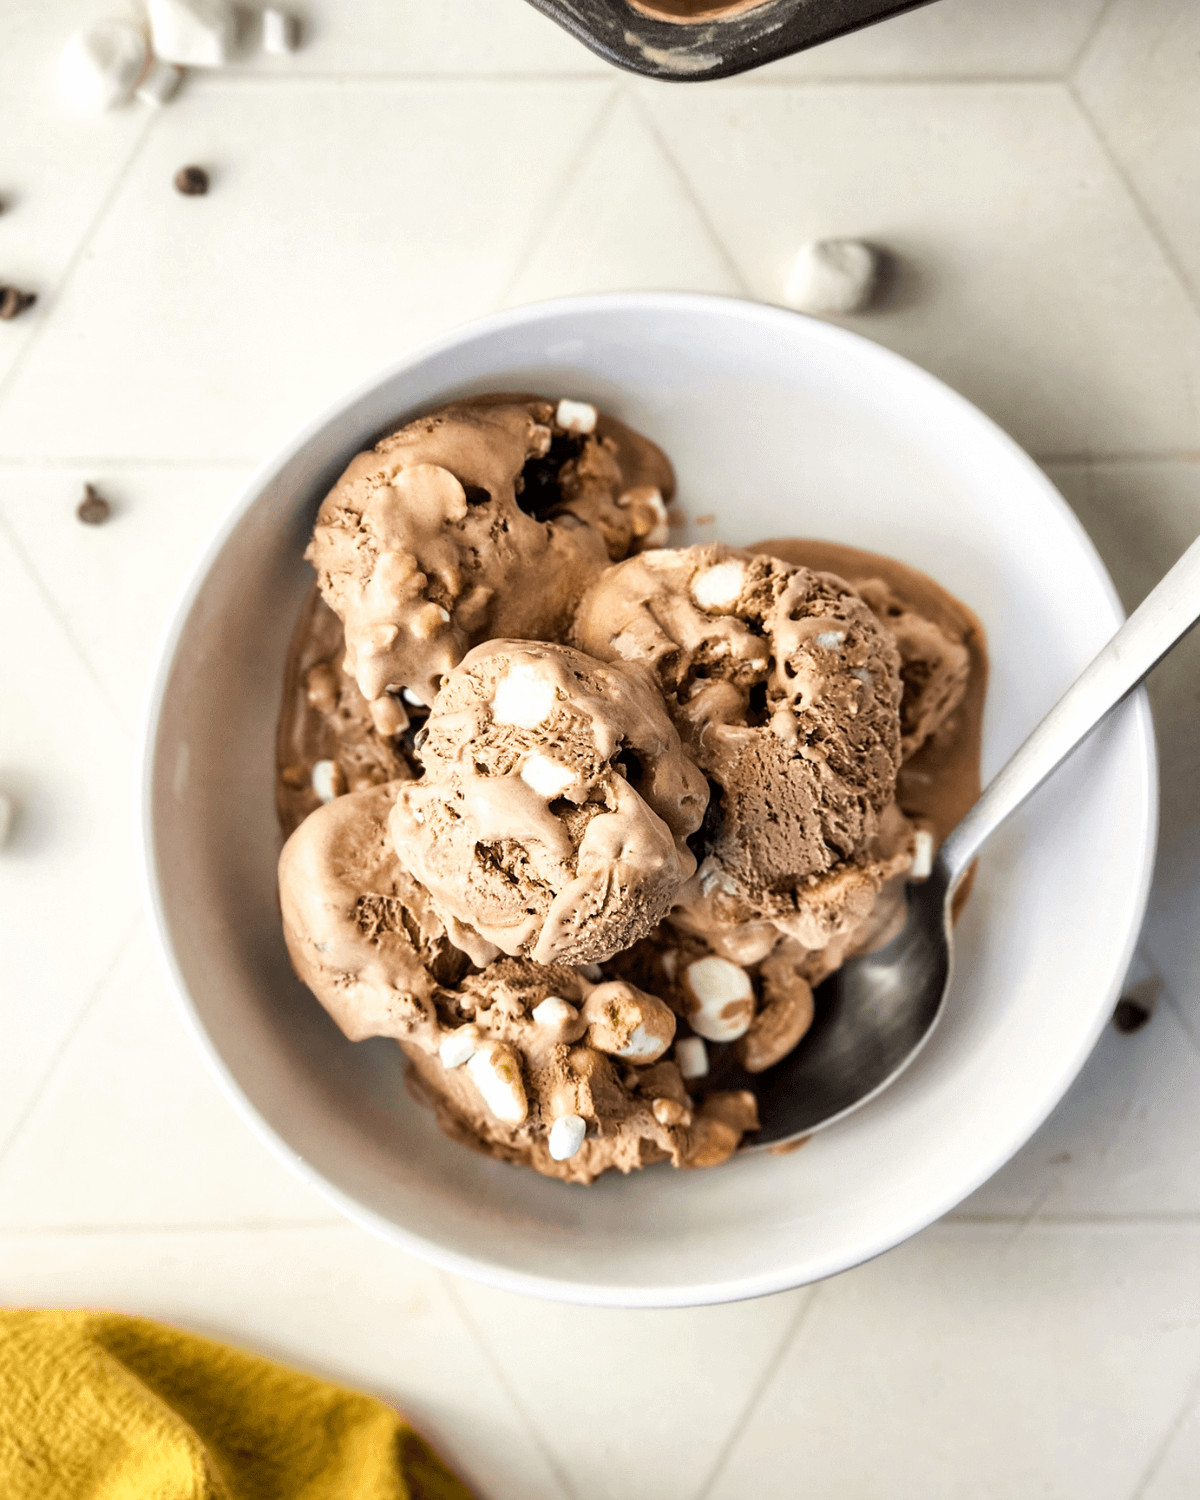 A bowl of cocoa condensed milk ice cream with marshmallows, chocolate chips, and condensed milk.